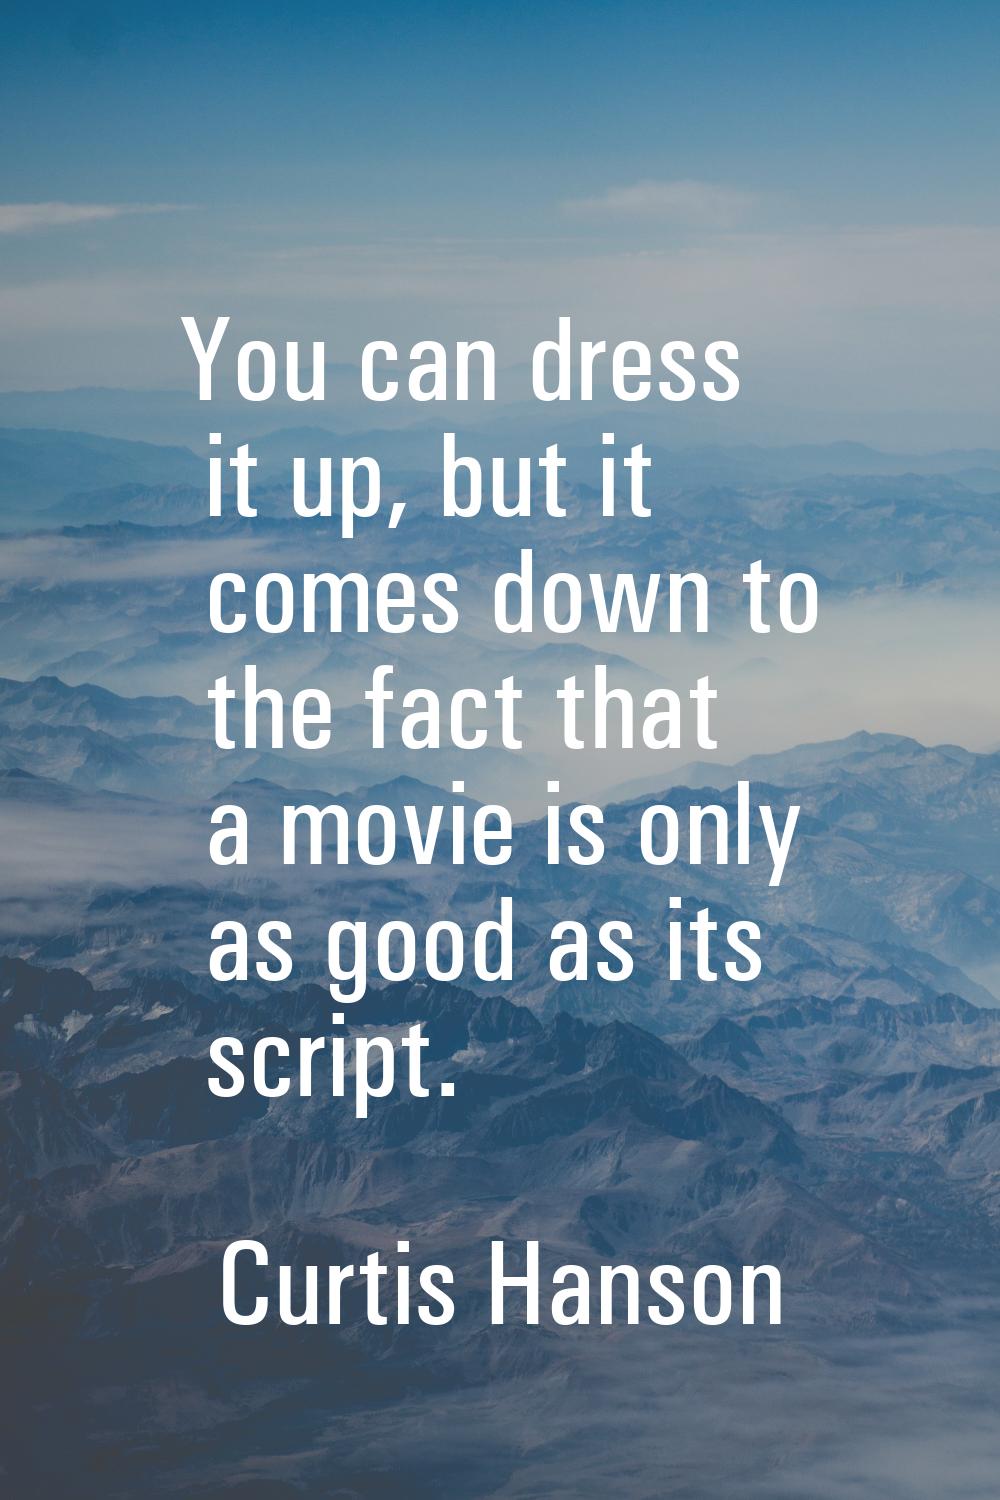 You can dress it up, but it comes down to the fact that a movie is only as good as its script.